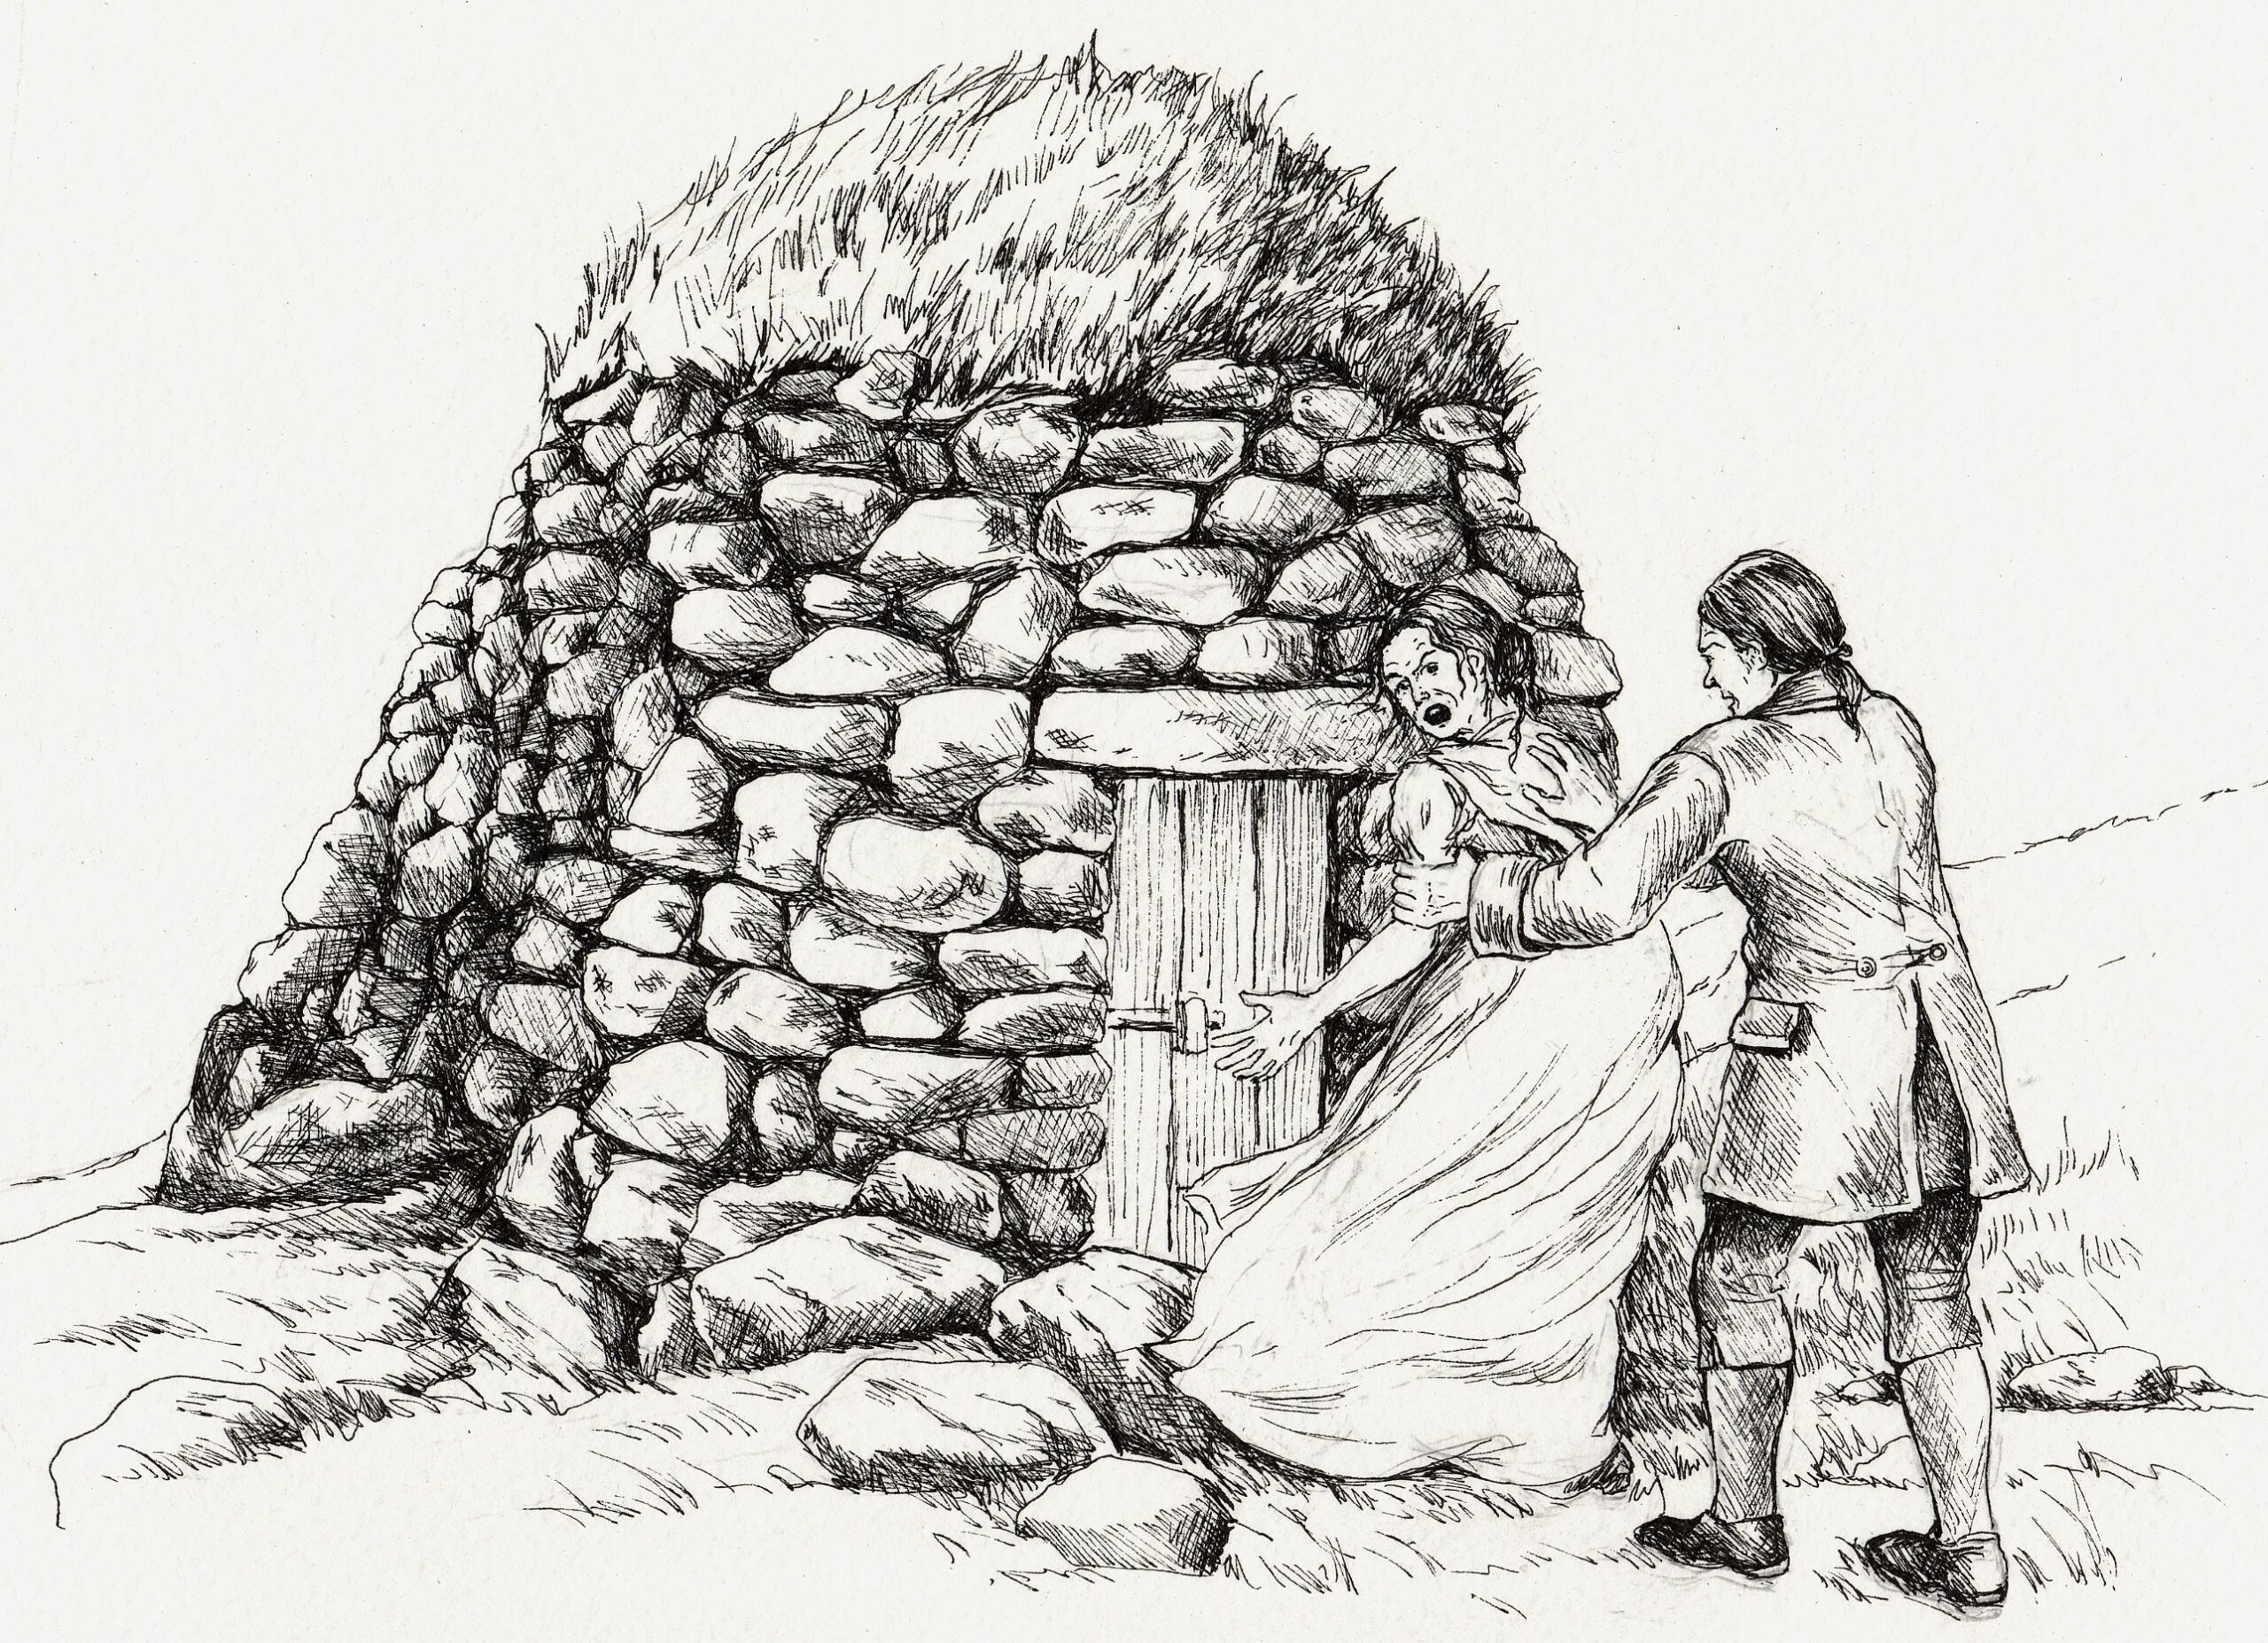 A black and white sketch showing the scene of Lady Grangr being moved into a cleit by a uniformed man